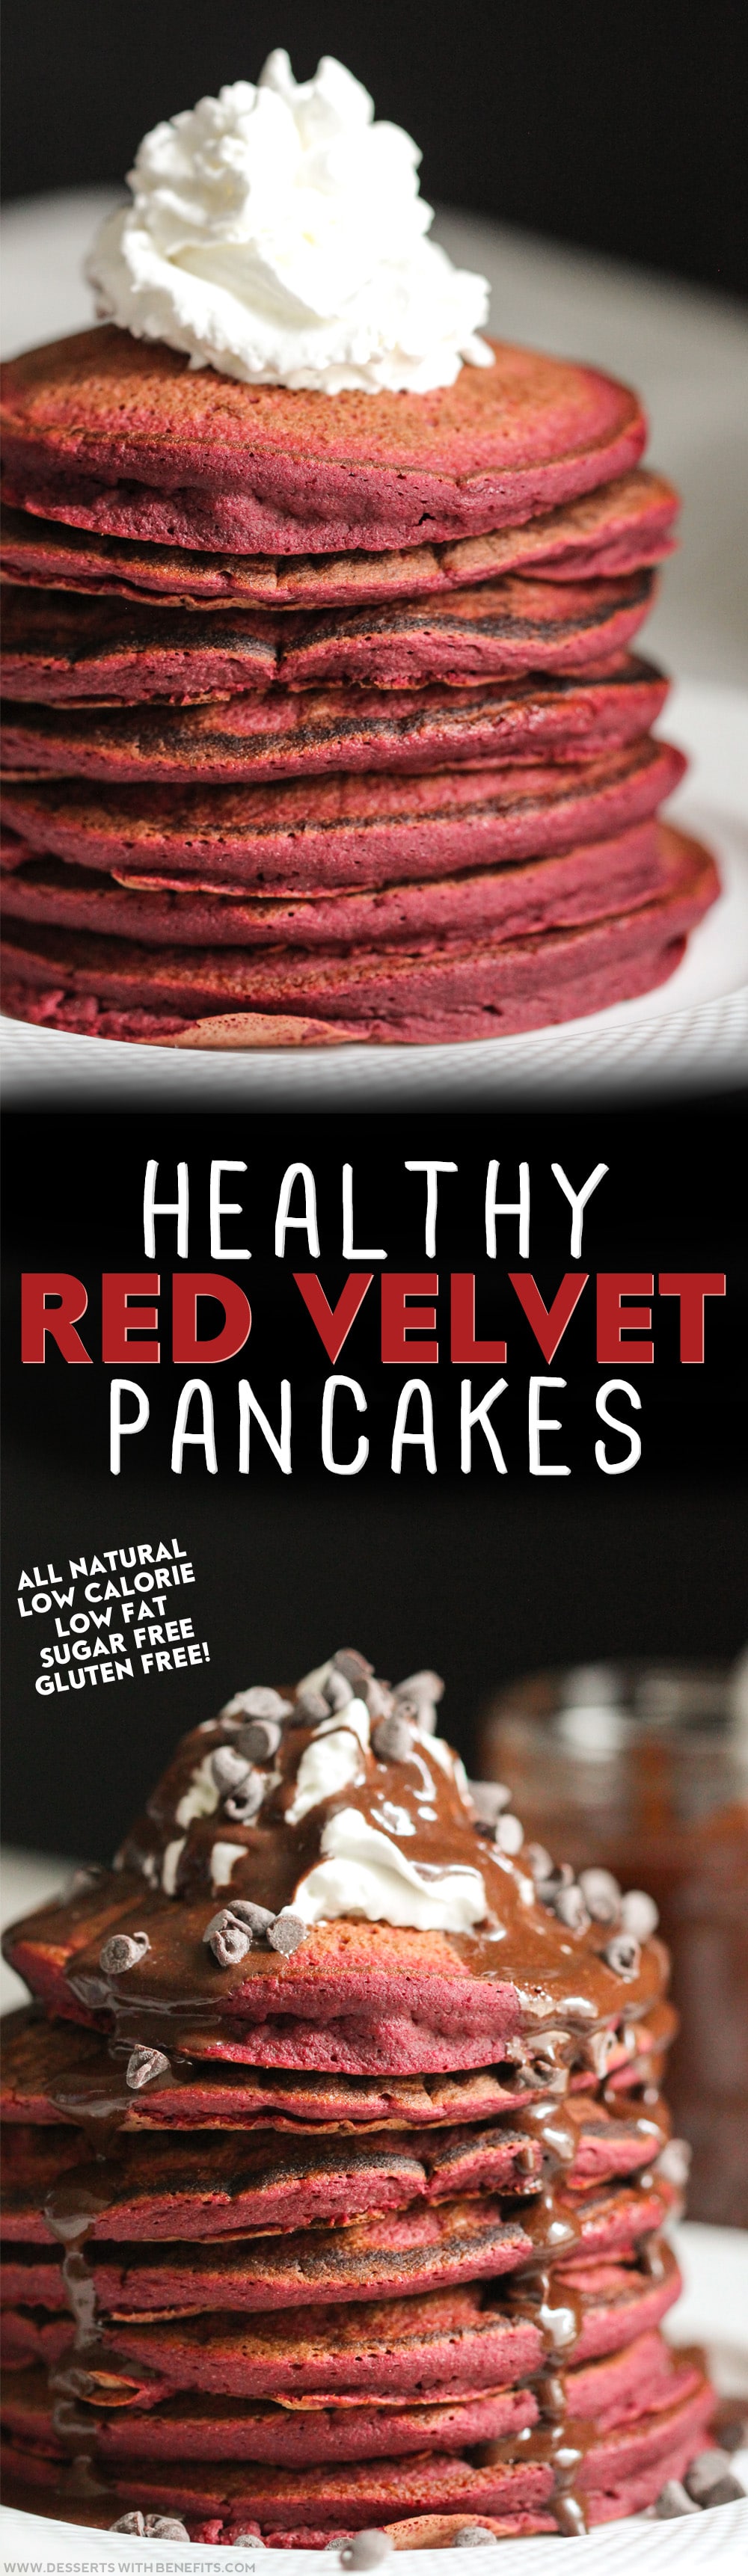 Healthy Red Velvet Pancakes recipe (refined sugar free, low fat, high fiber, gluten free, dairy free) - Healthy Dessert Recipes at Desserts with Benefits